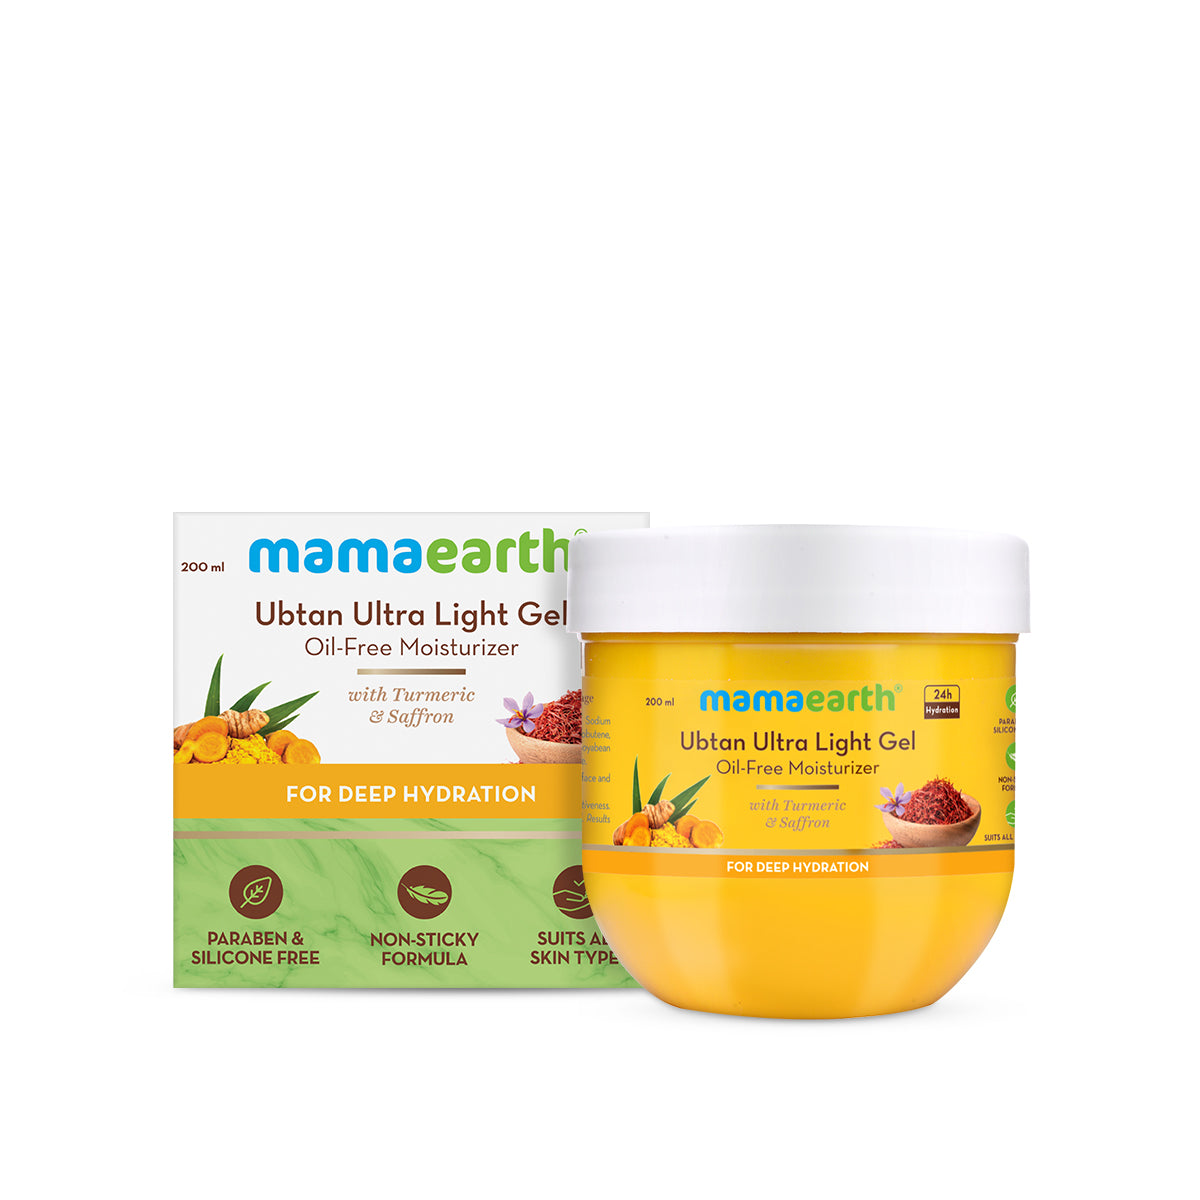 Mamaearth Ubtan Ultra Light Gel Oil-Free Moisturizer For Face, Body and Hands; with Turmeric & Saffron for Deep Hydration - 200 ml